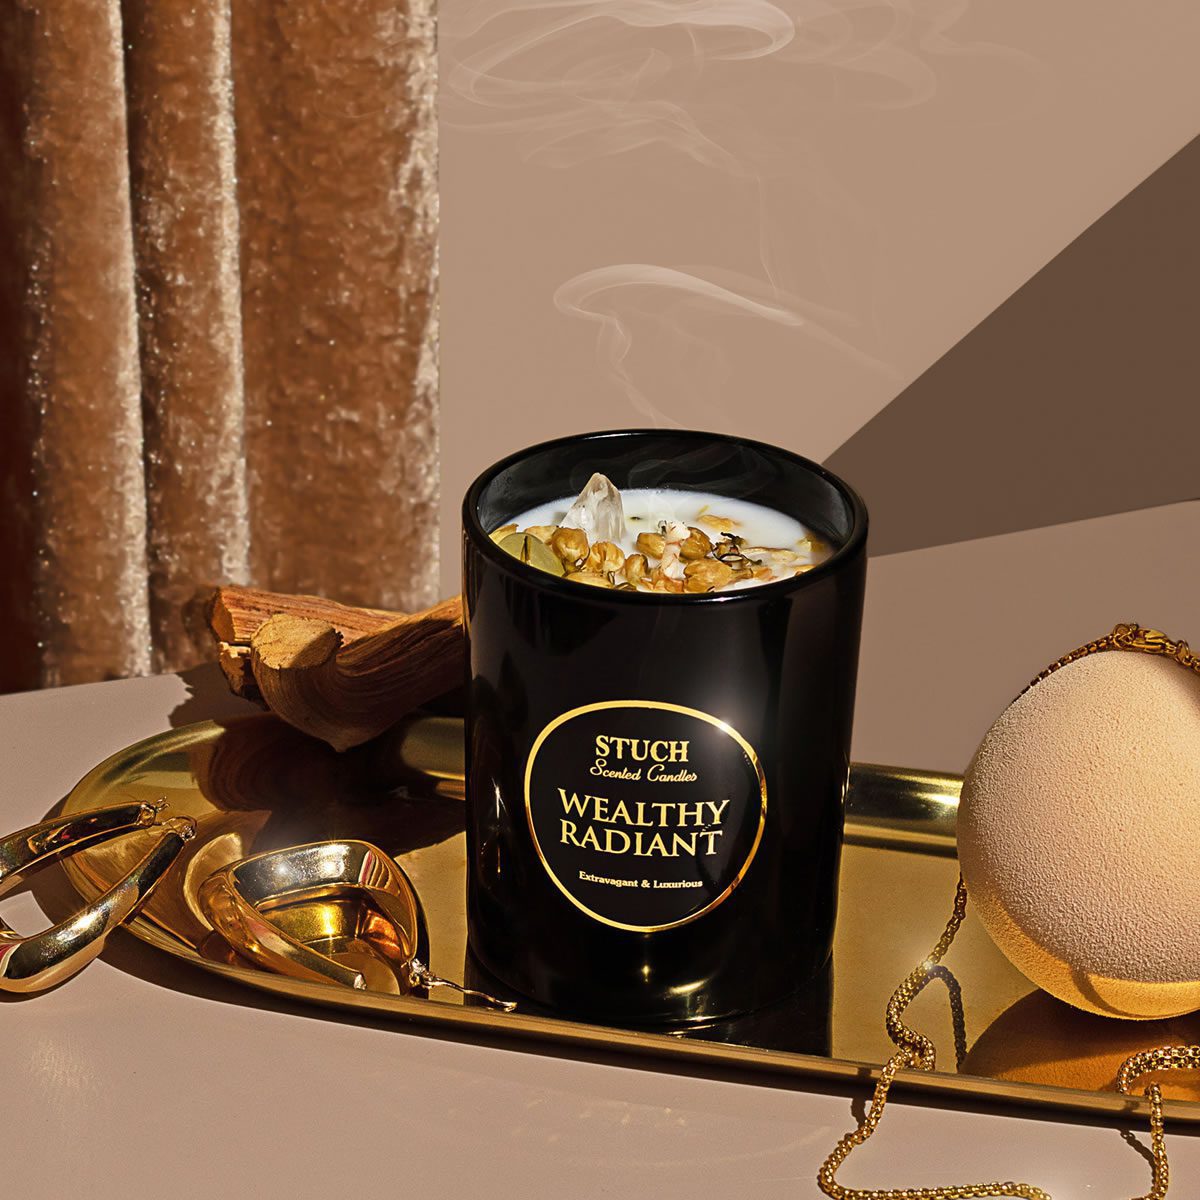 Wealthy radiant scented candle